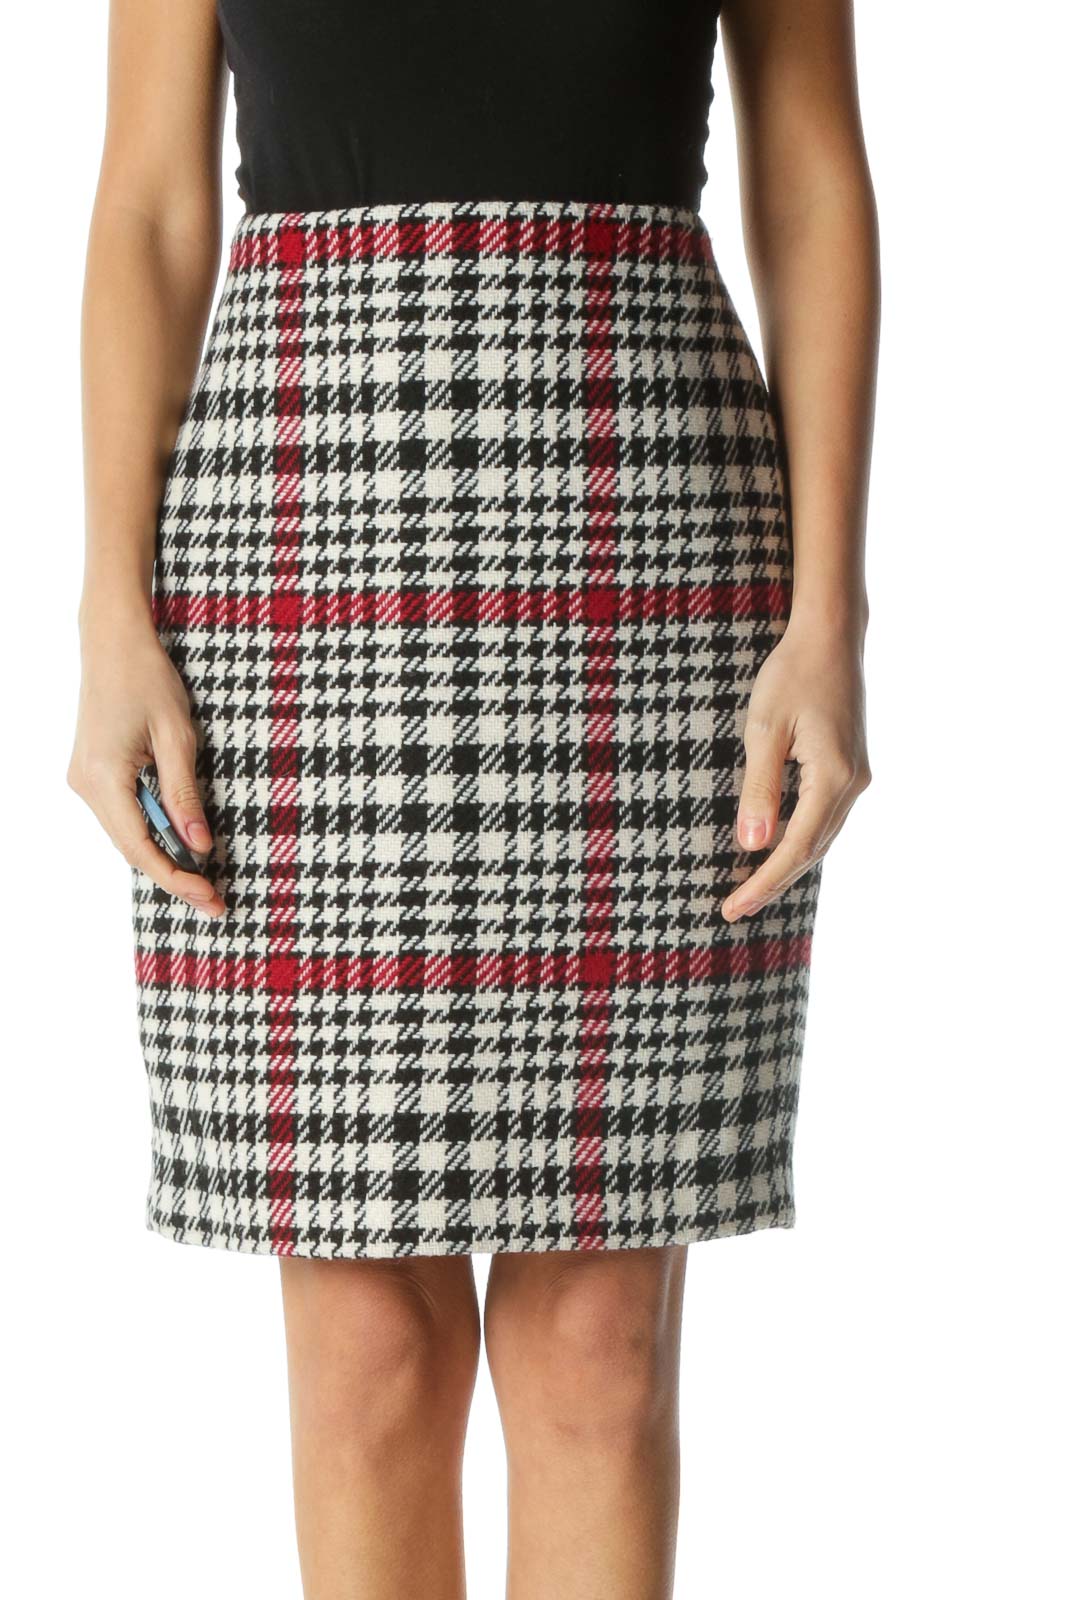 Black Burgundy and White Houndstooth Print Pencil Skirt Front